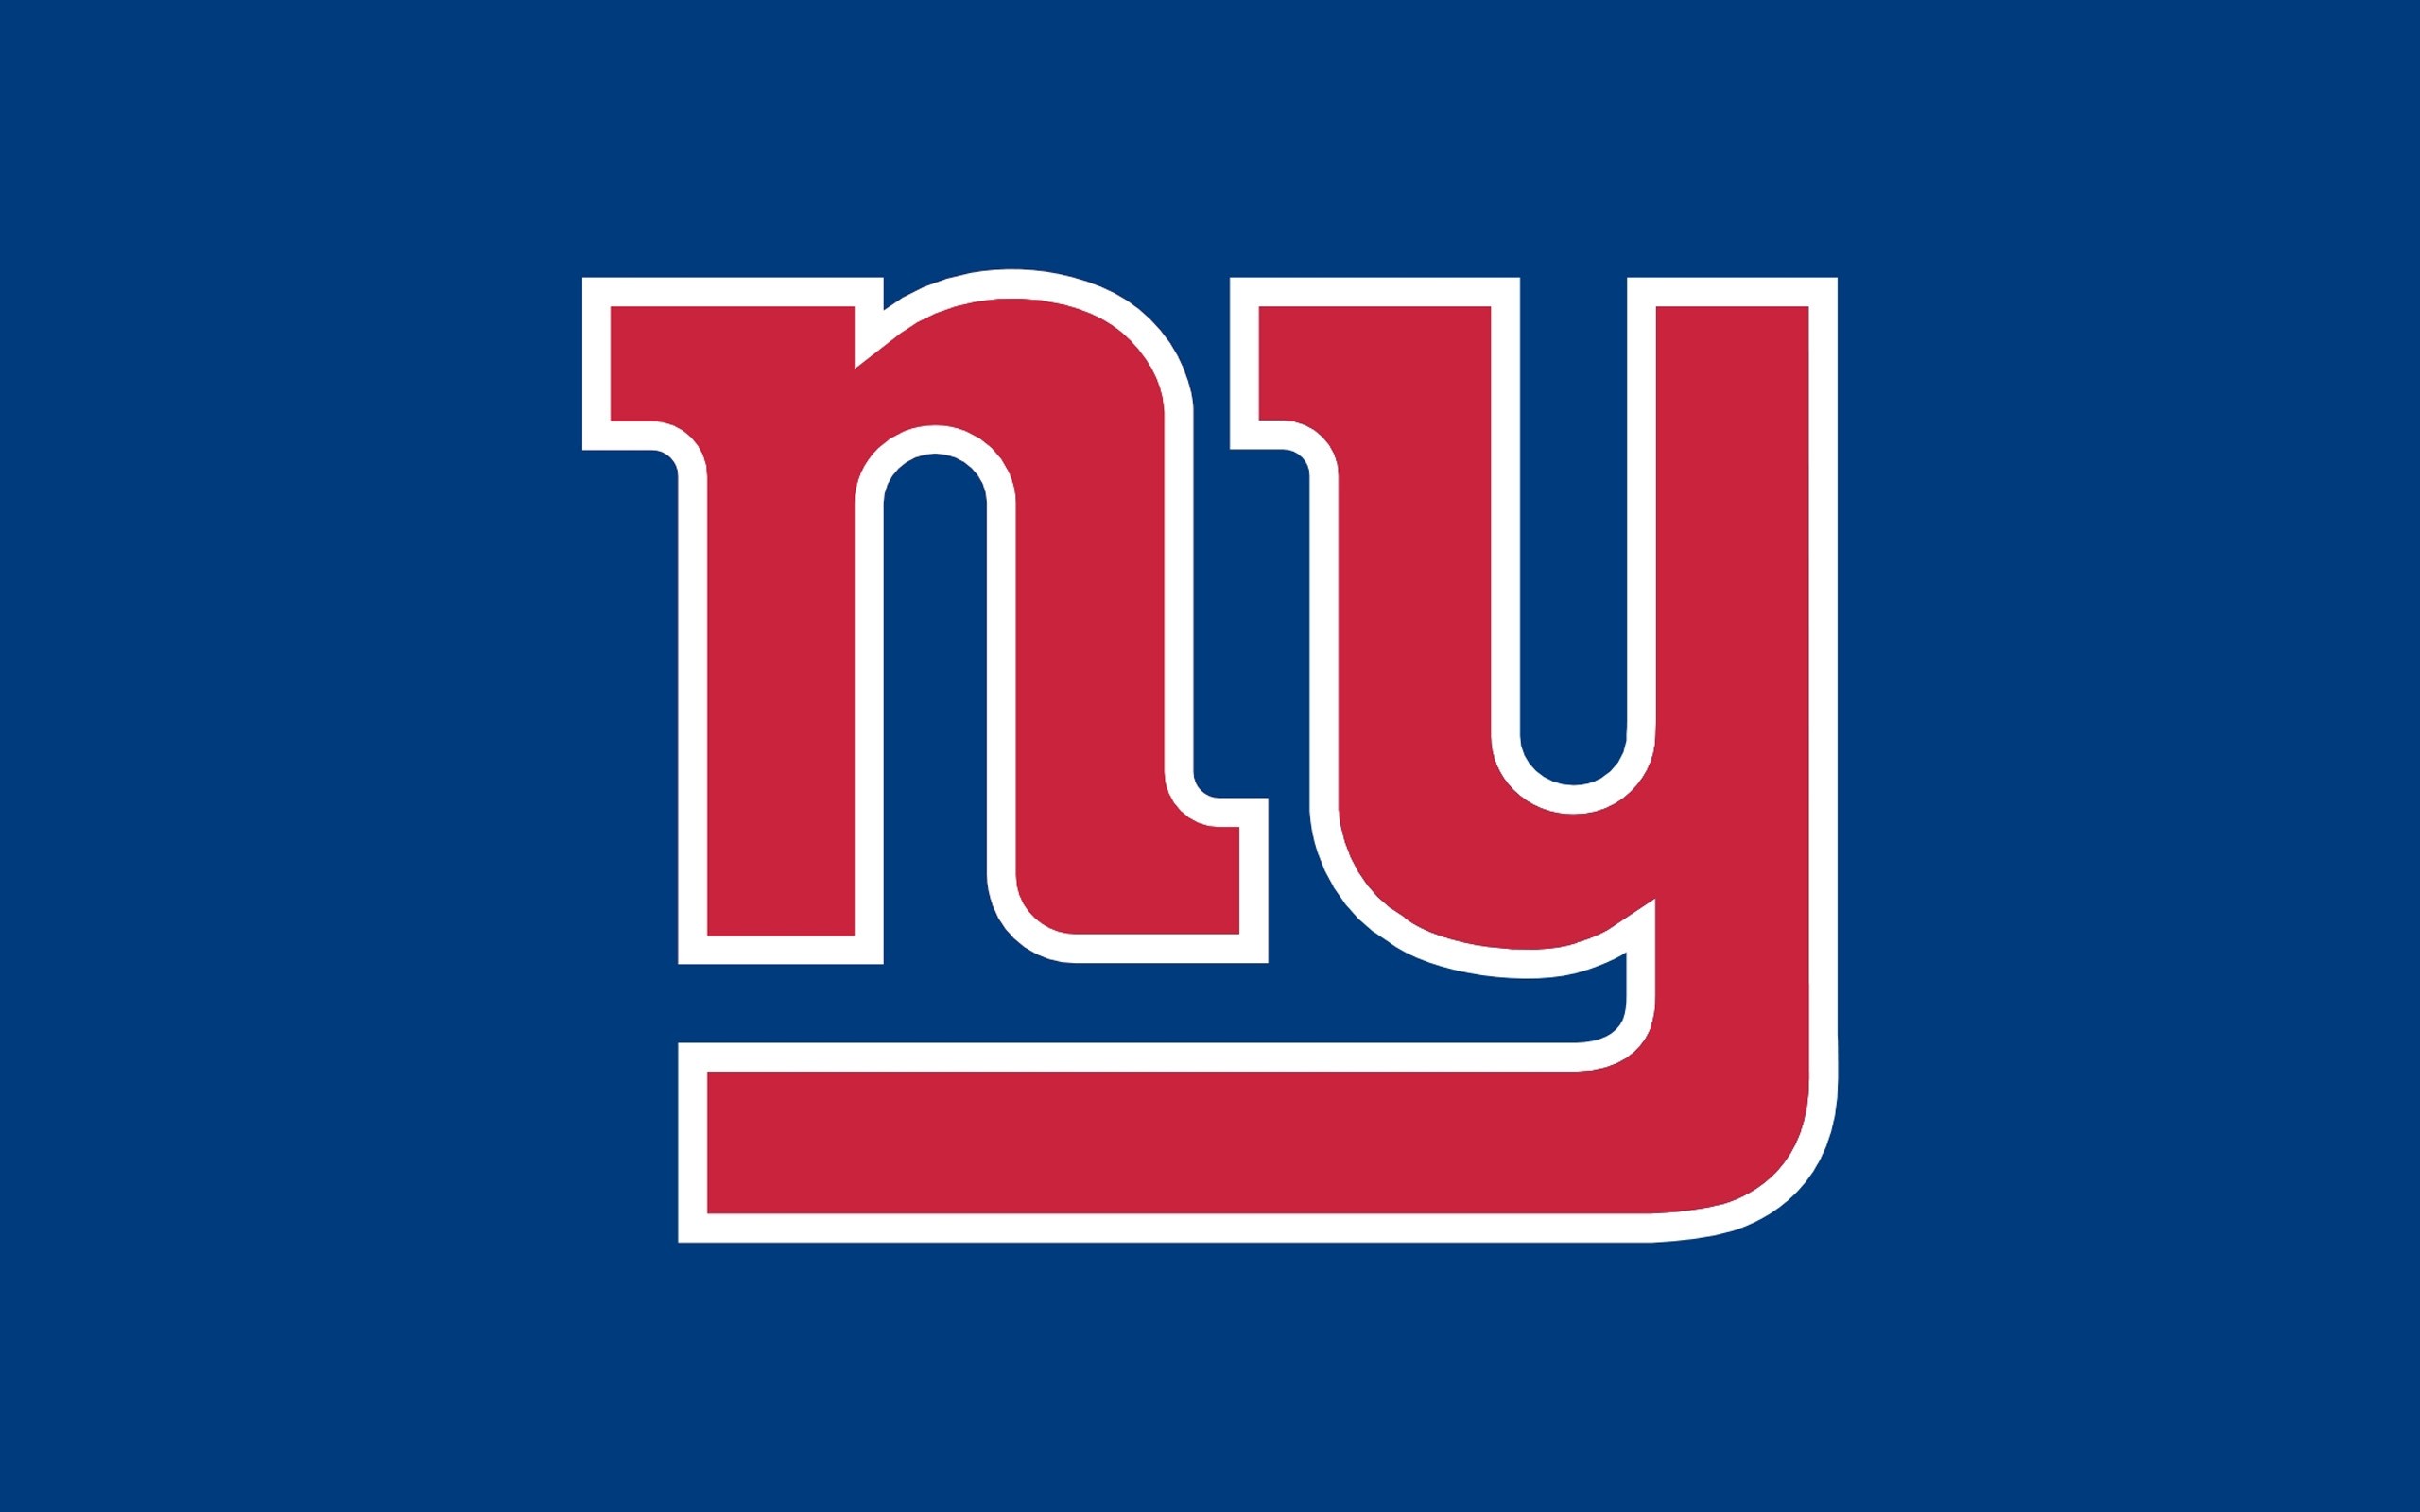 New York Giants Wallpapers For Desktop, HQ Backgrounds | HD ...